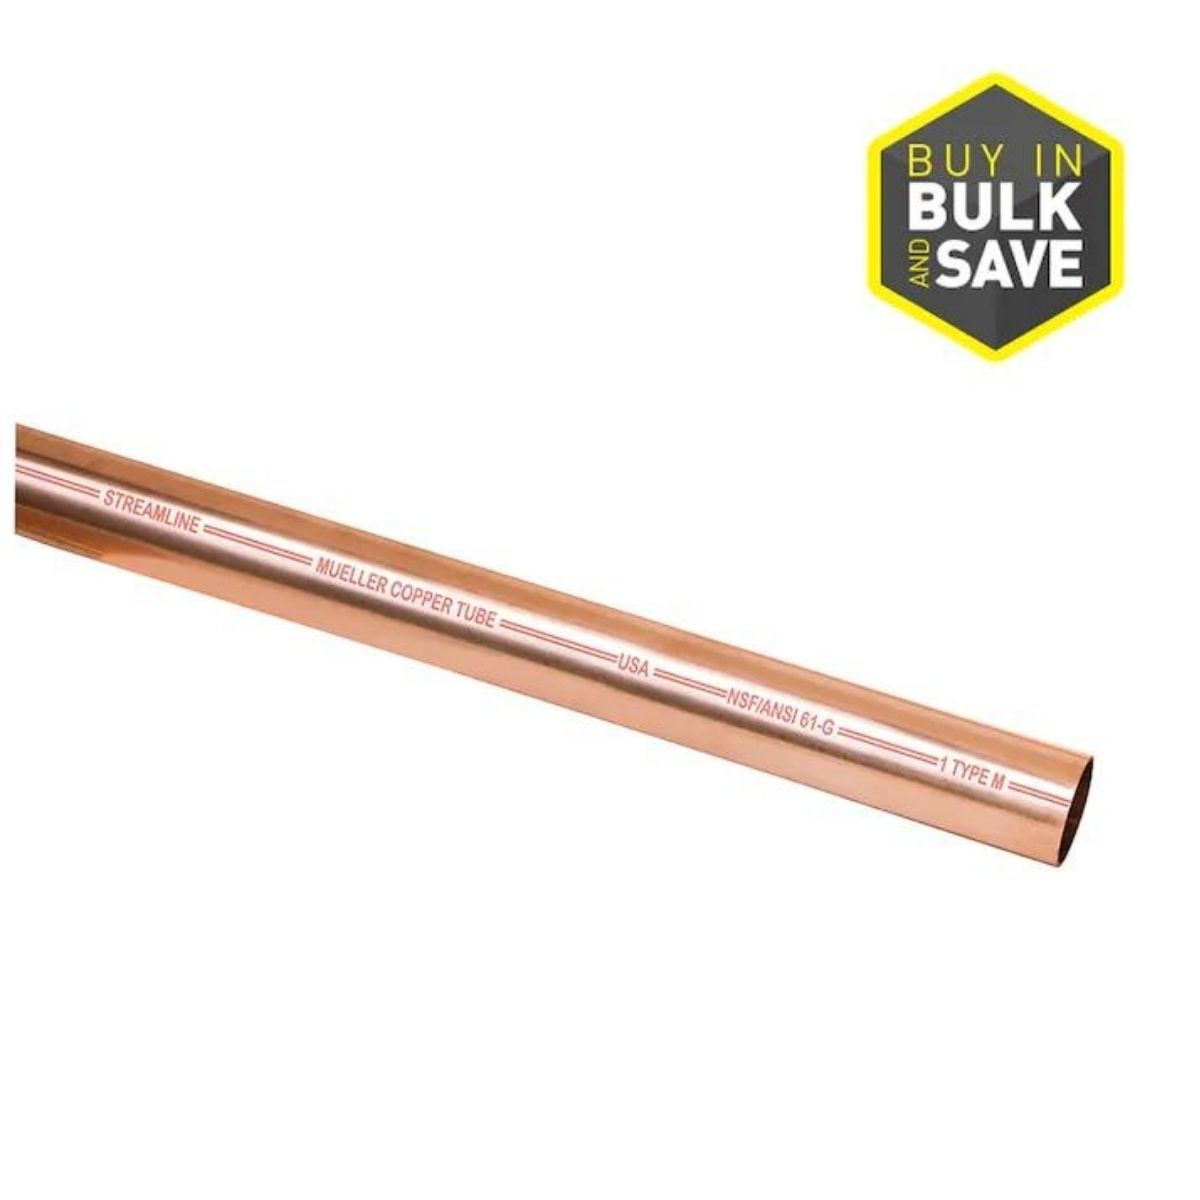 The Copper Pipe Types Option: Type M Copper Pipe